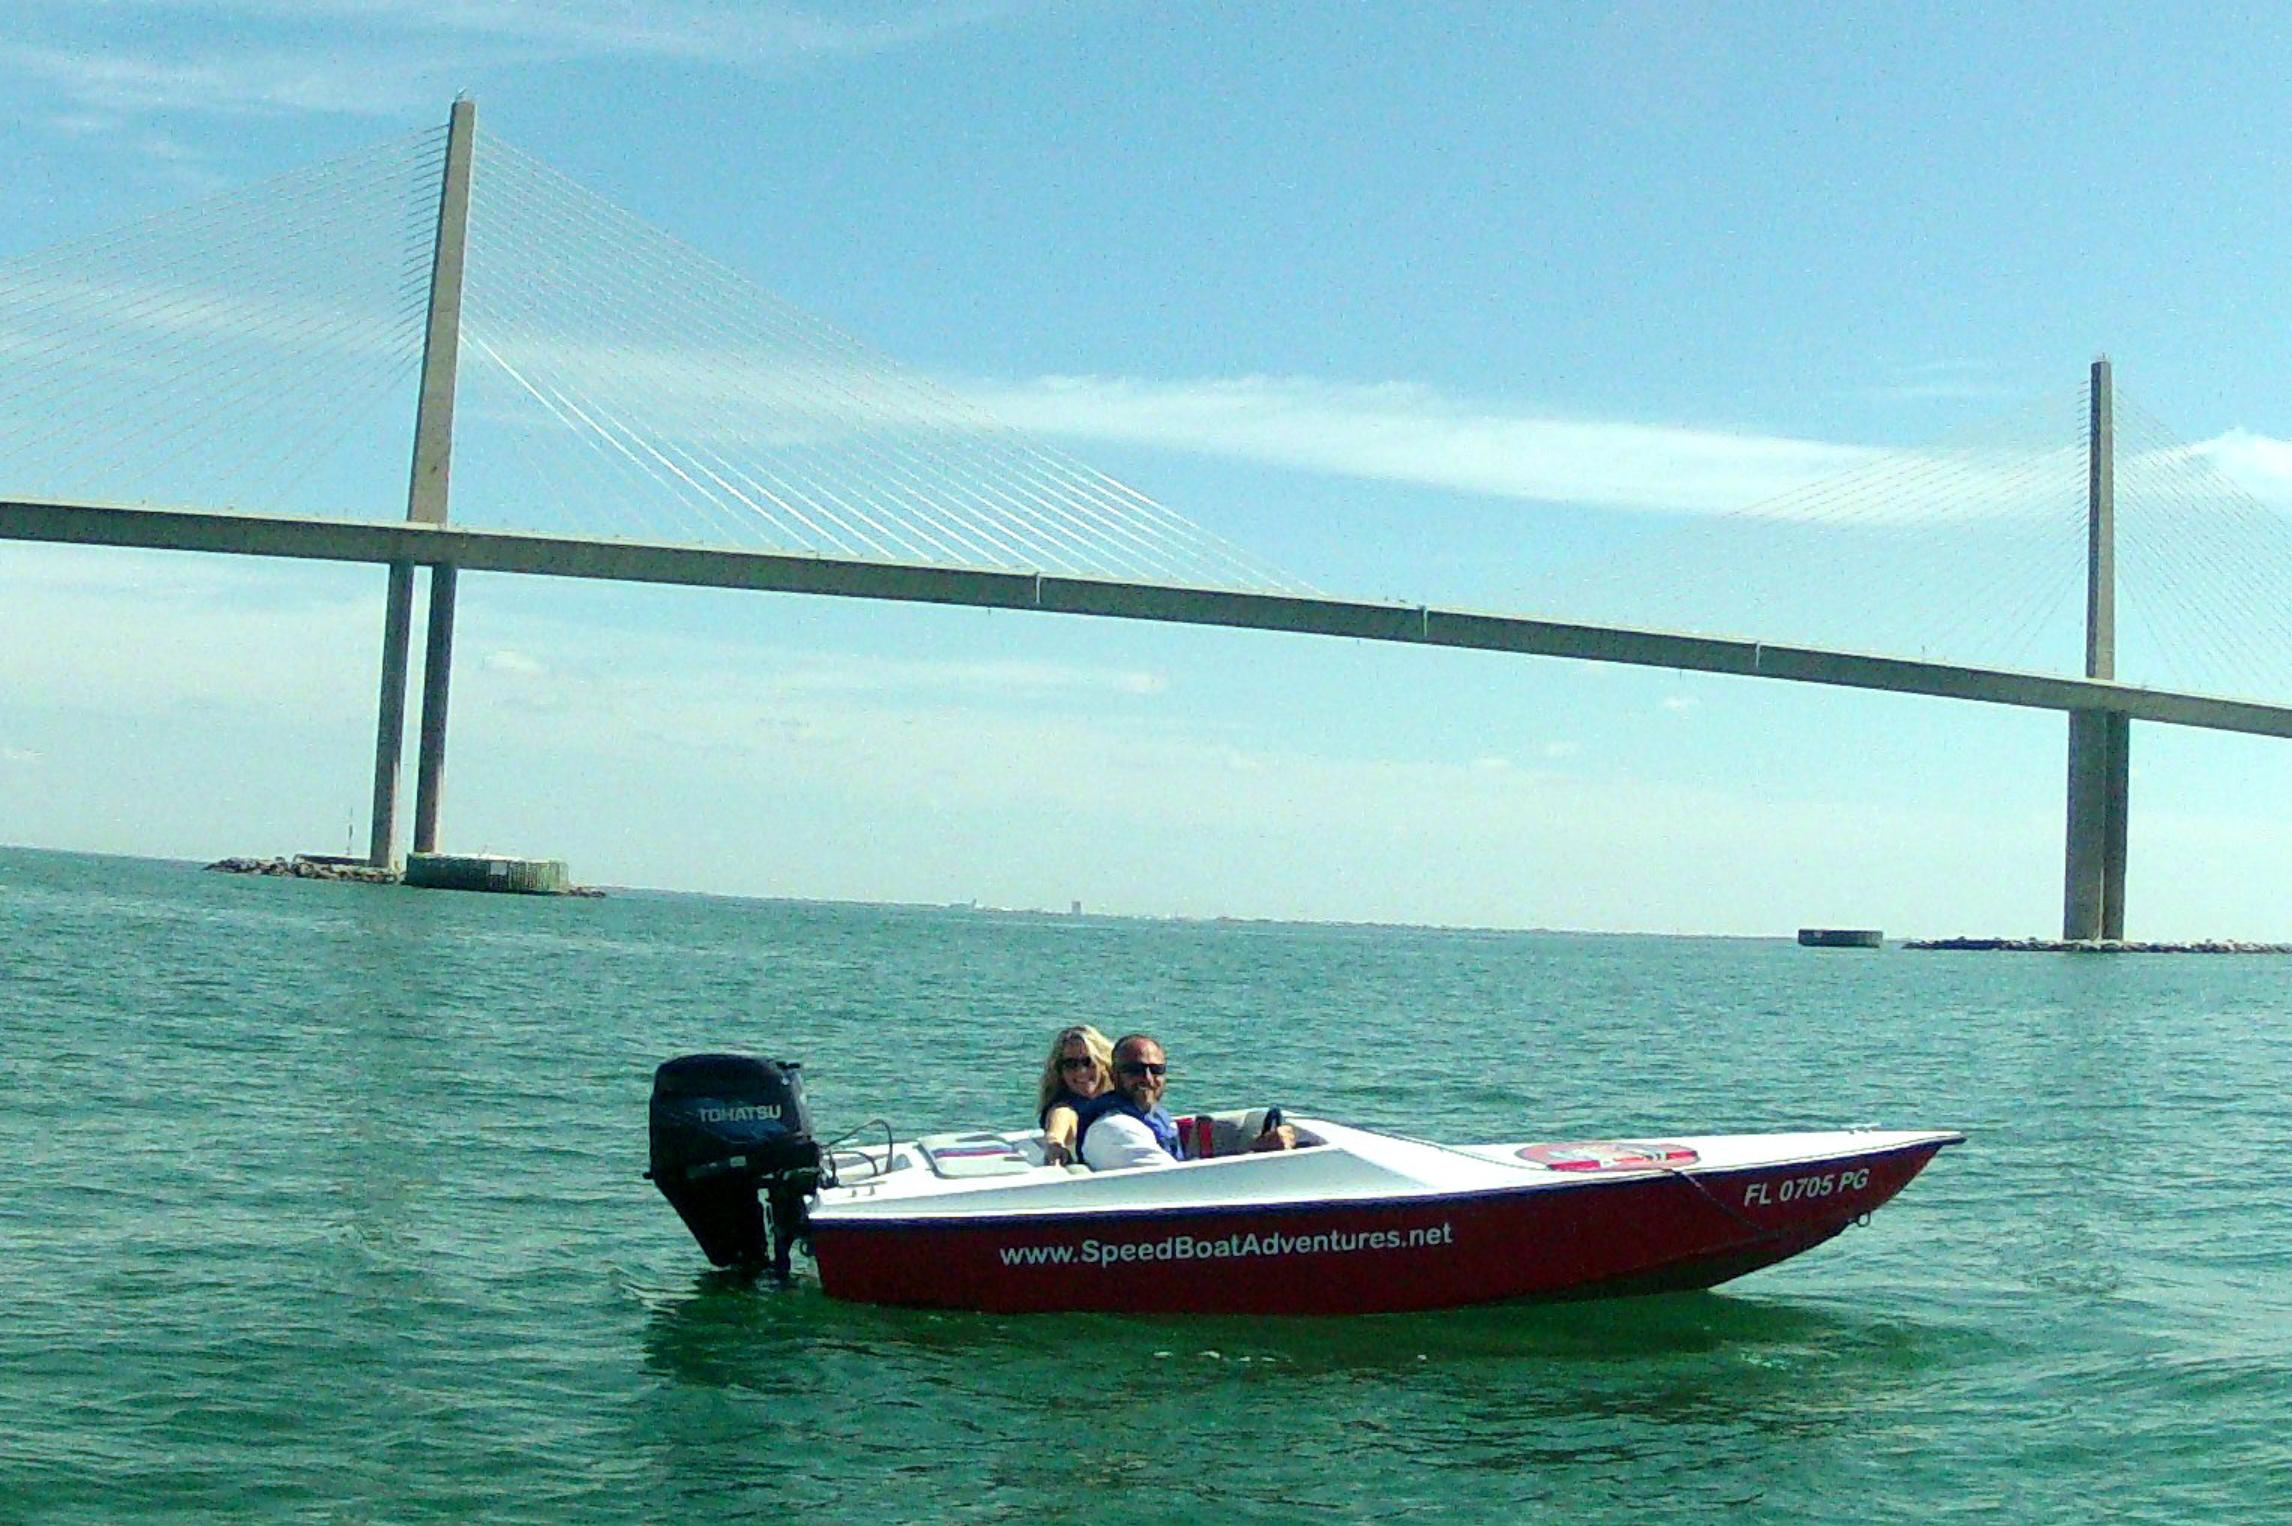 Drive a Speedboat in Tampa Bay – Departure from St. Petersburg (FL)